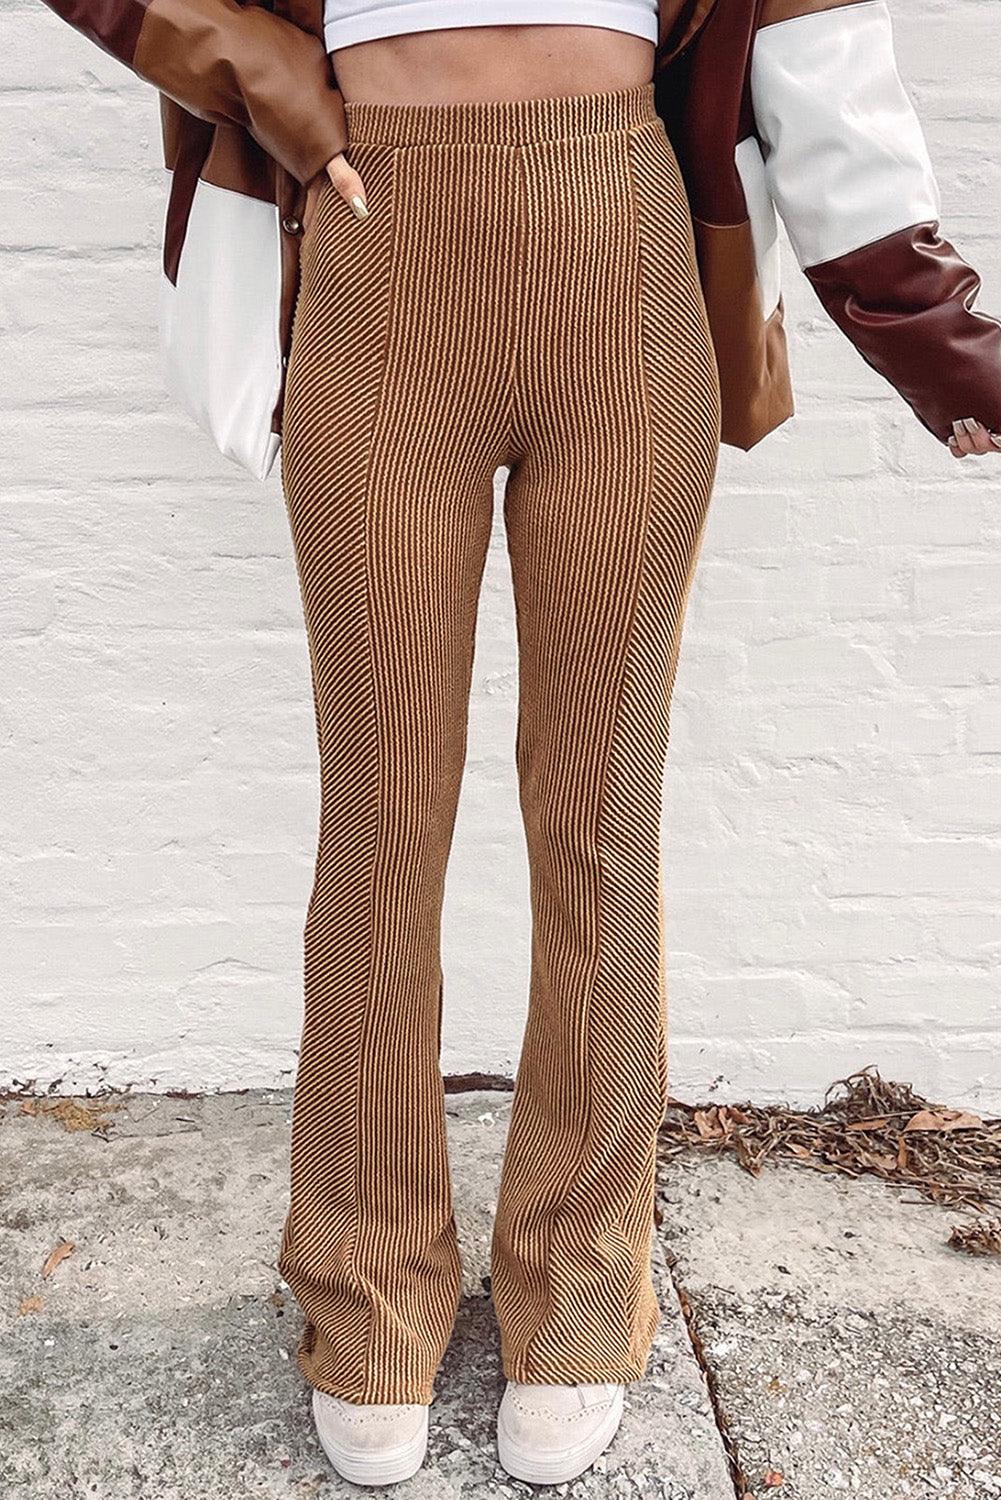 Brown Ribbed Knit High Rise Flare Leggings - L & M Kee, LLC